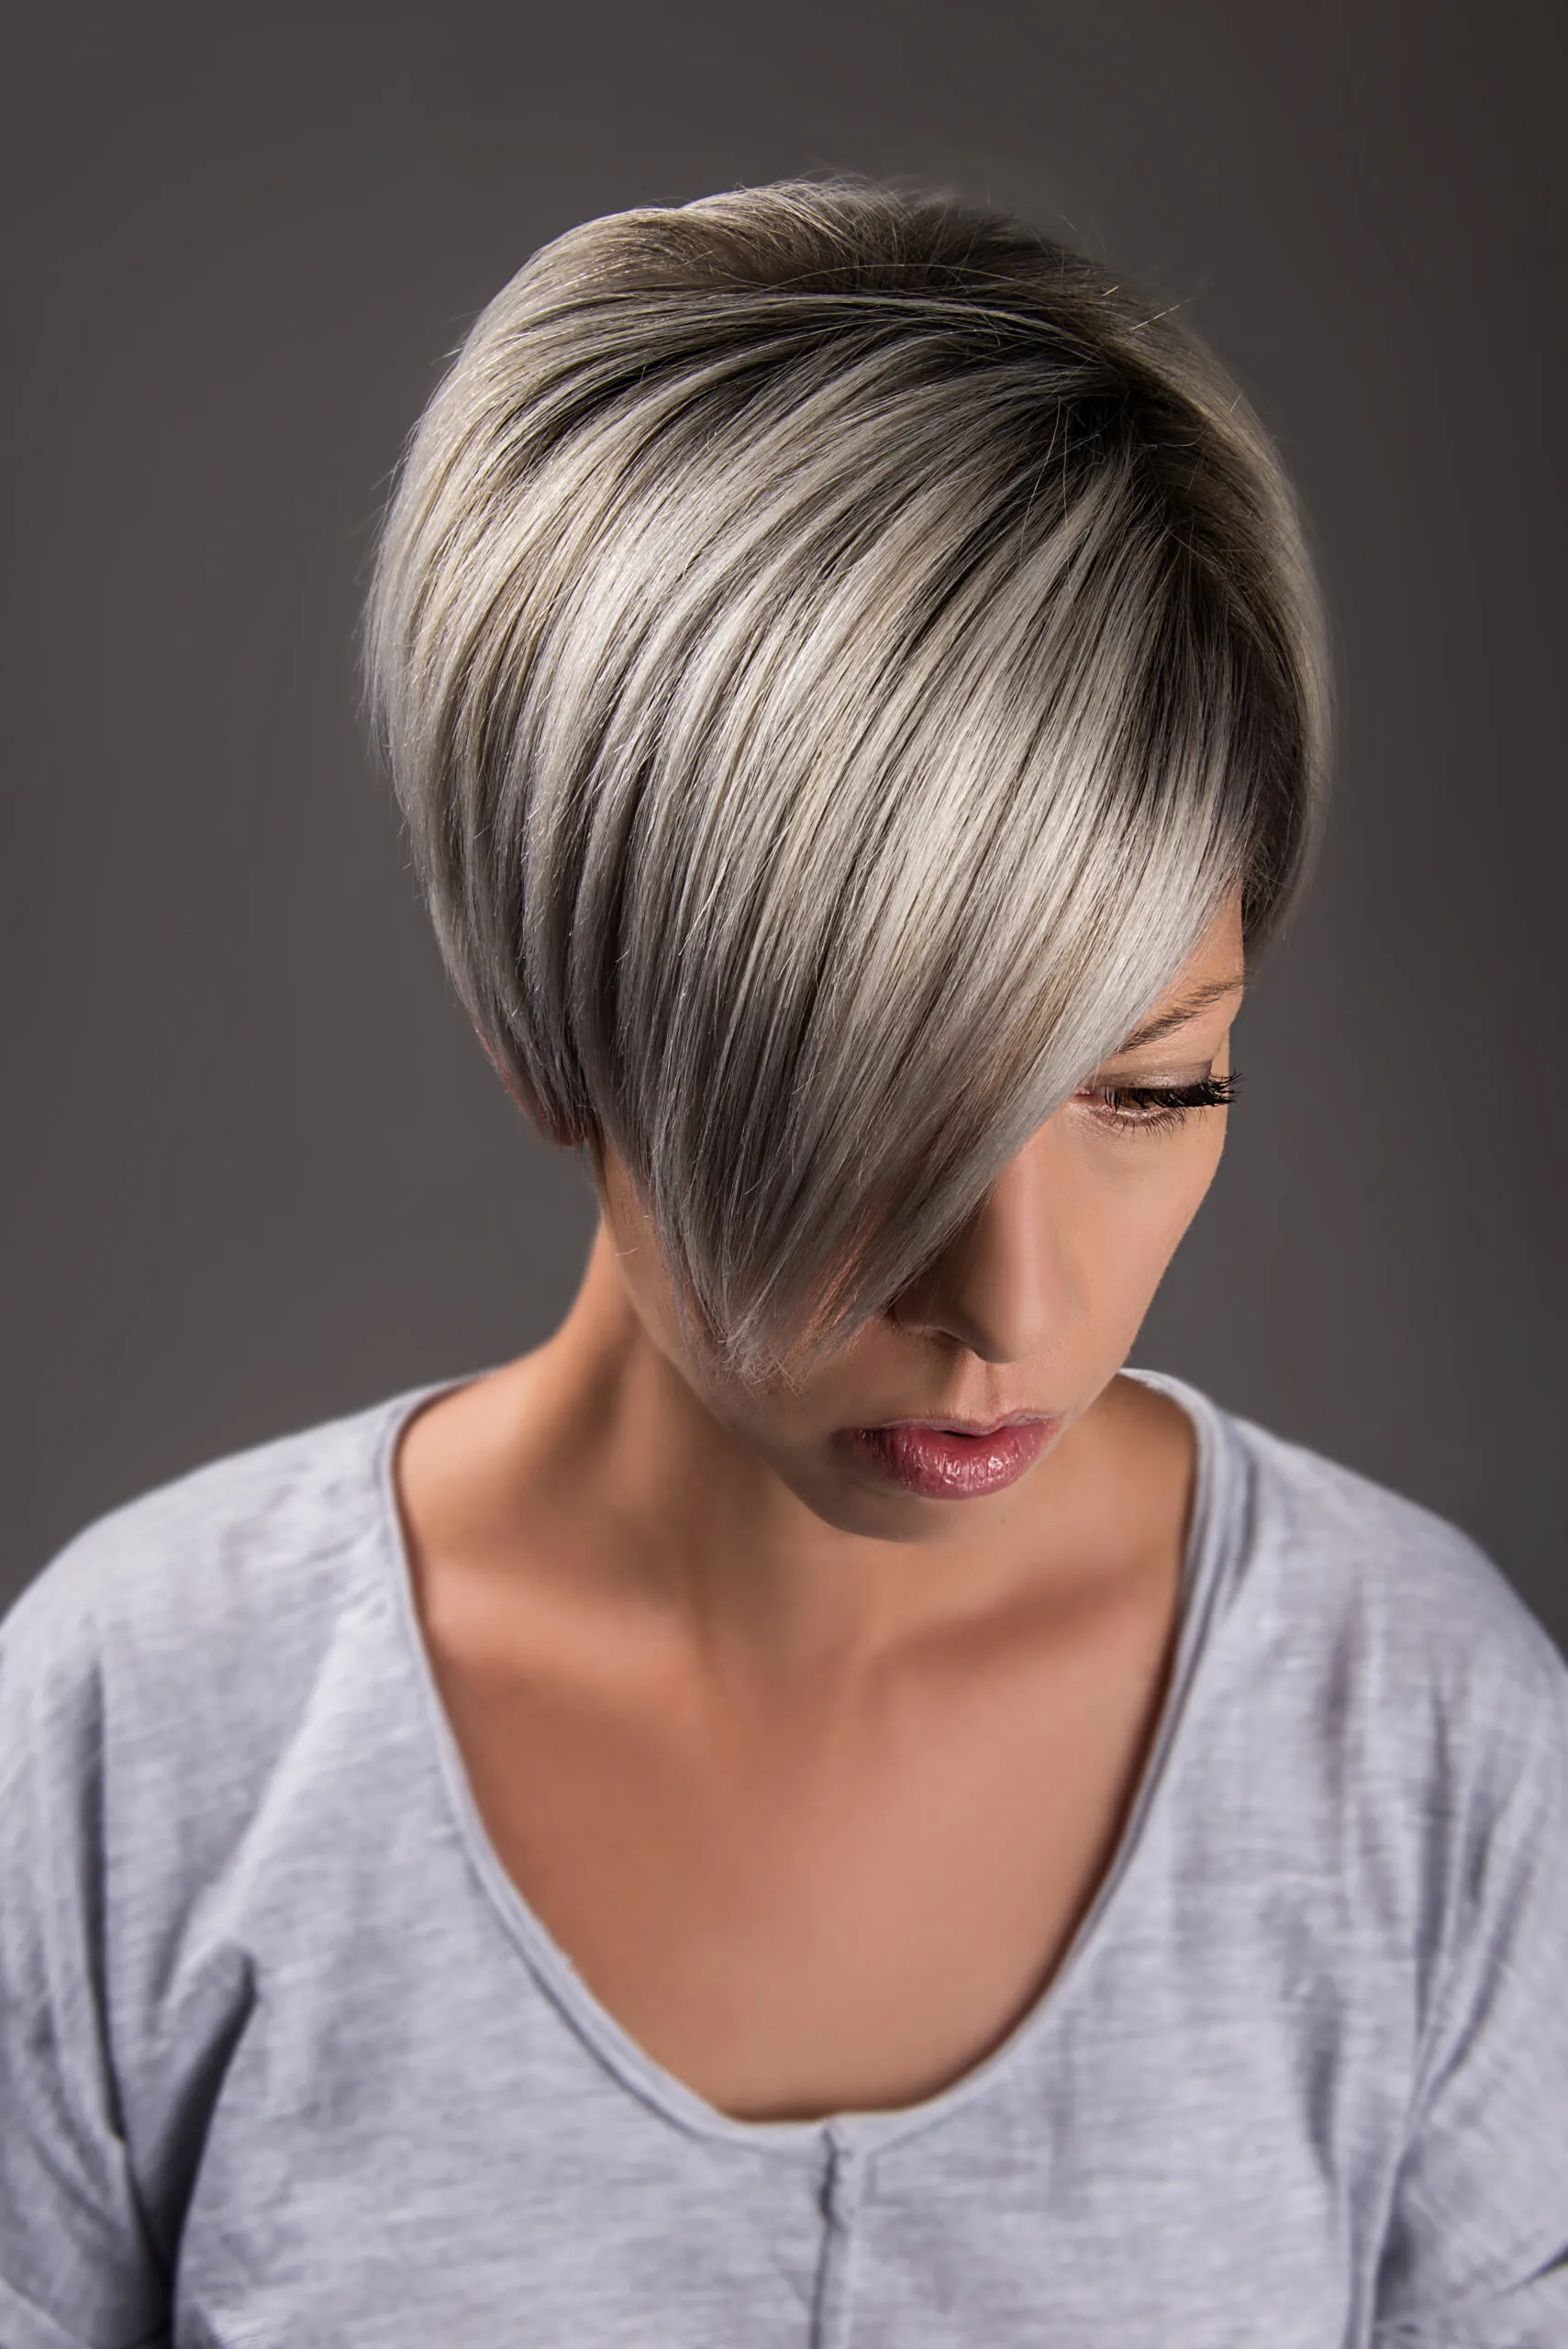 Inverted Bob Short Grey Hairstyle With Long Side Bangs